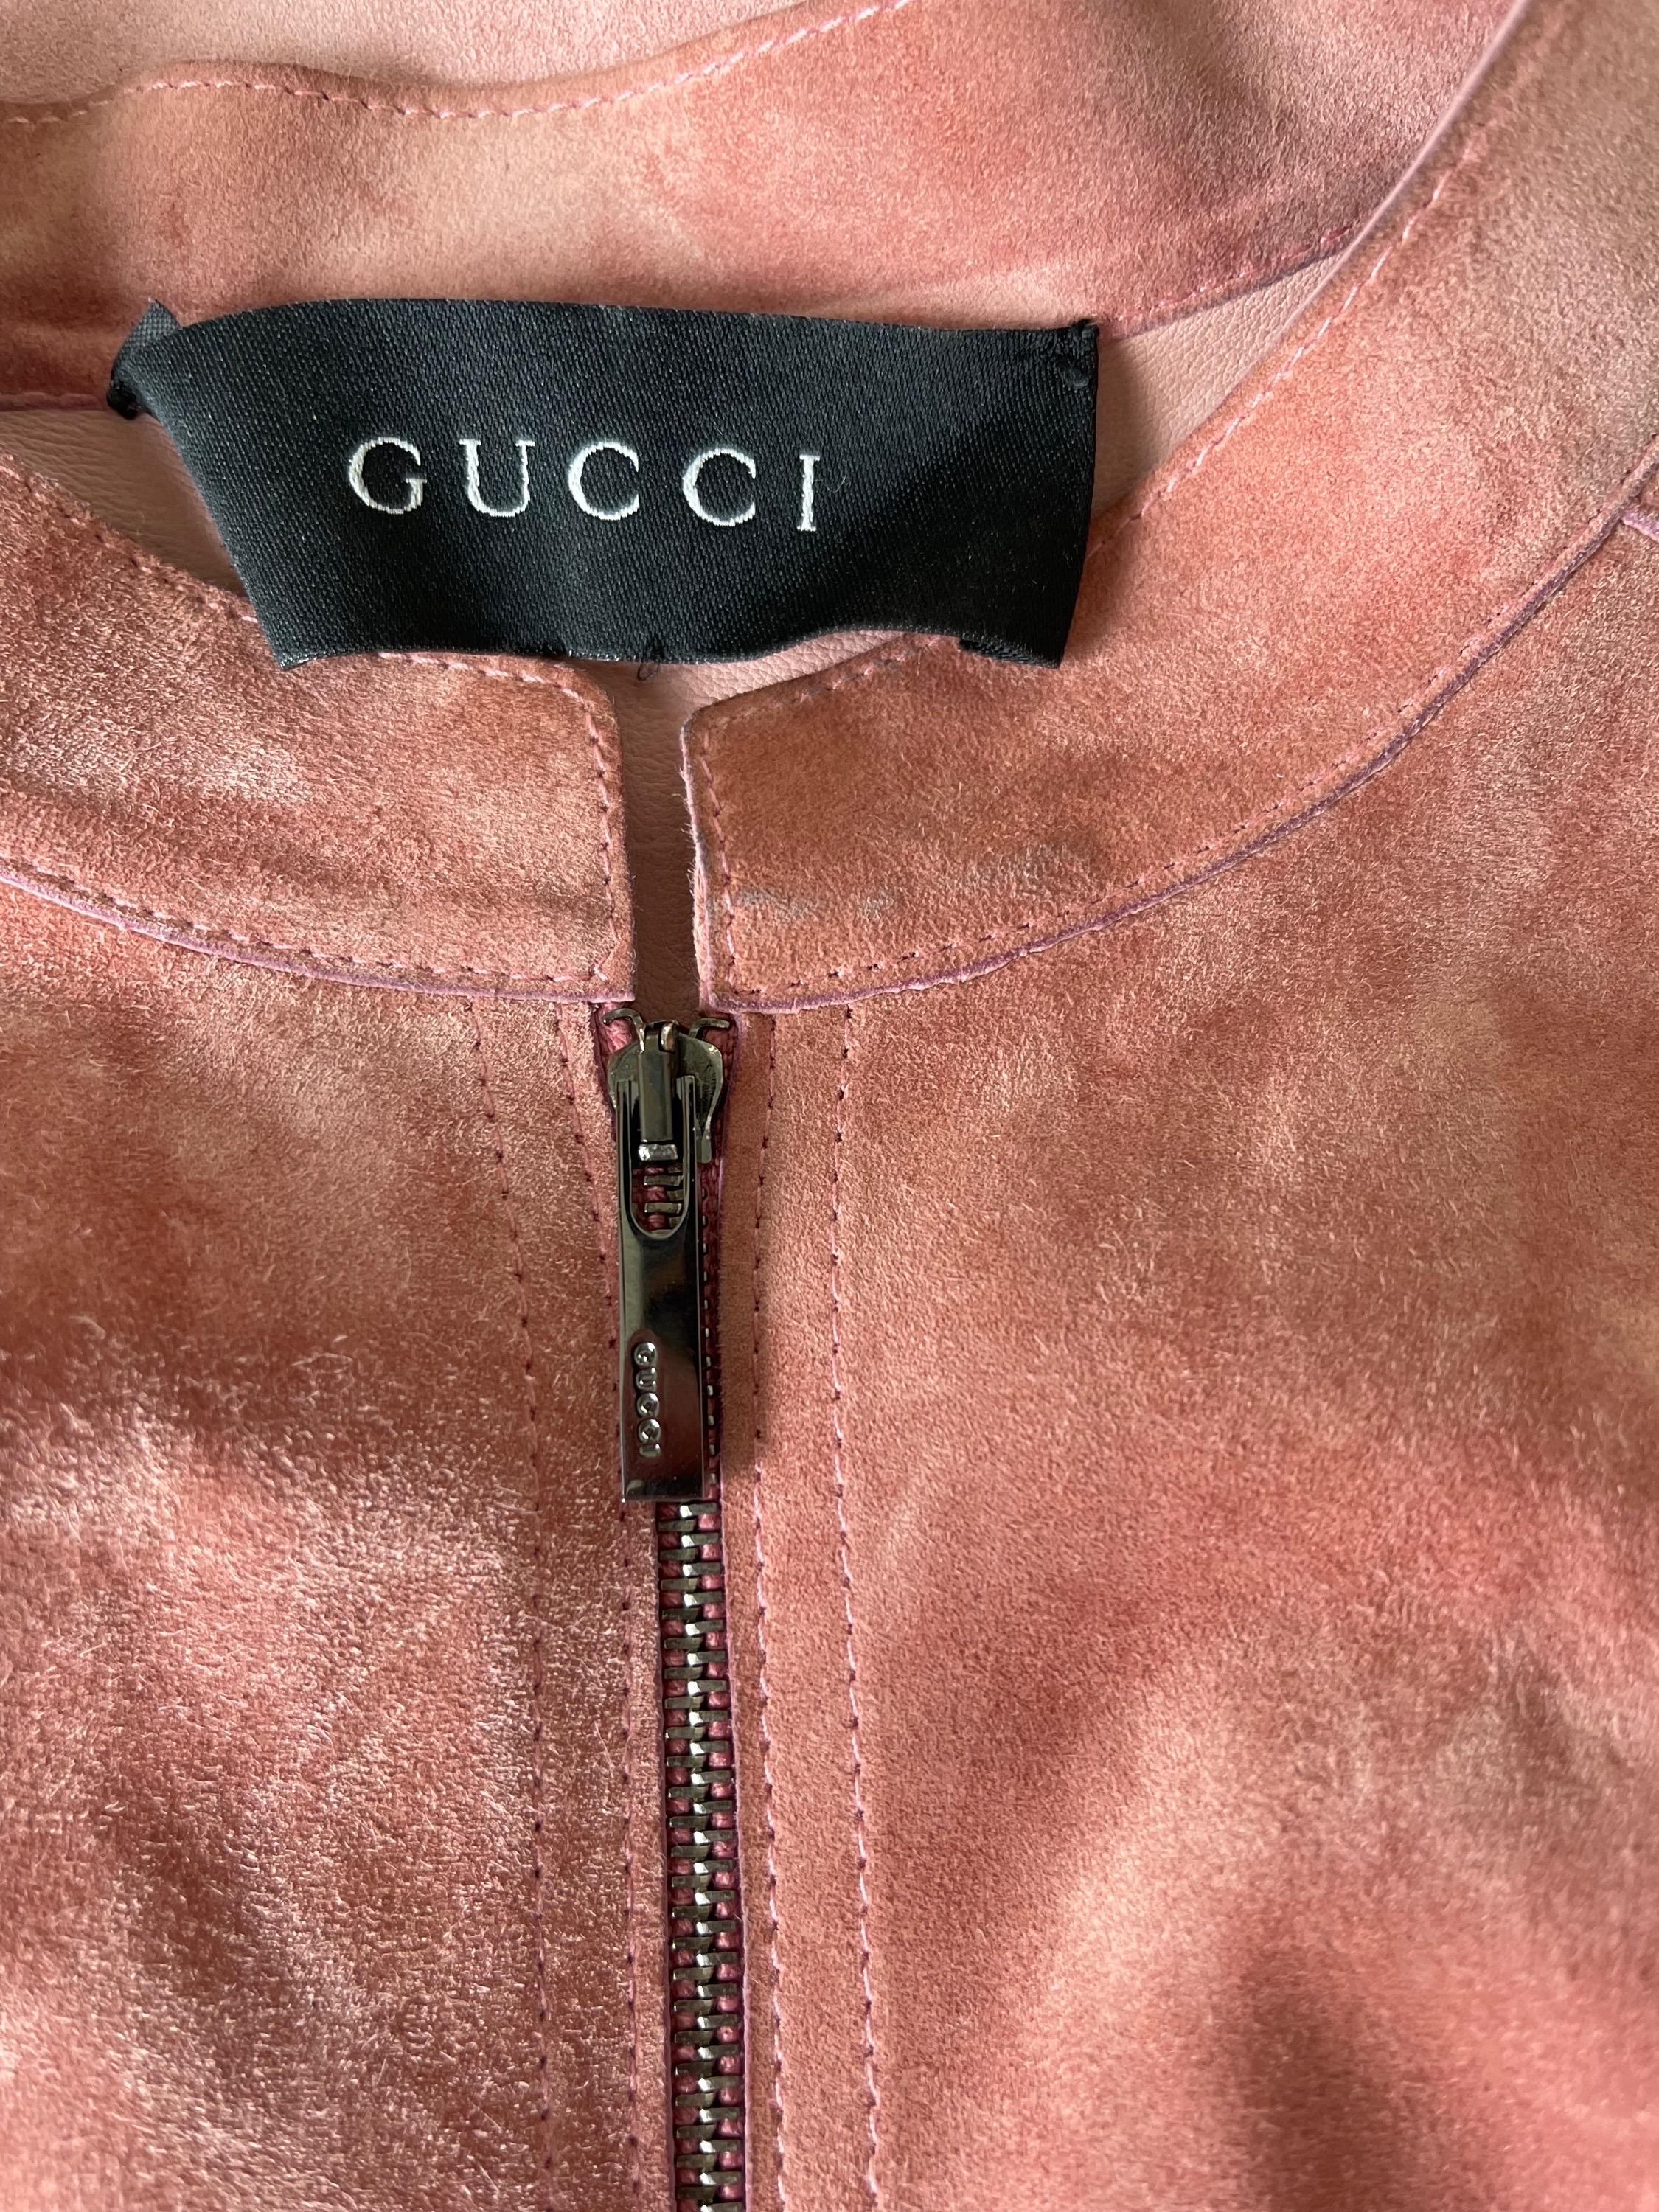 Rare TOM FORD for GUCCI early 2000s pink / dusty rose suede jacket ! Tailored fit, with single gunmetal logo embossed zipper up the front. Small pockets at each breast. Snaps at each sleeve cuff. Perfect layered, or worn as a shirt.
In great